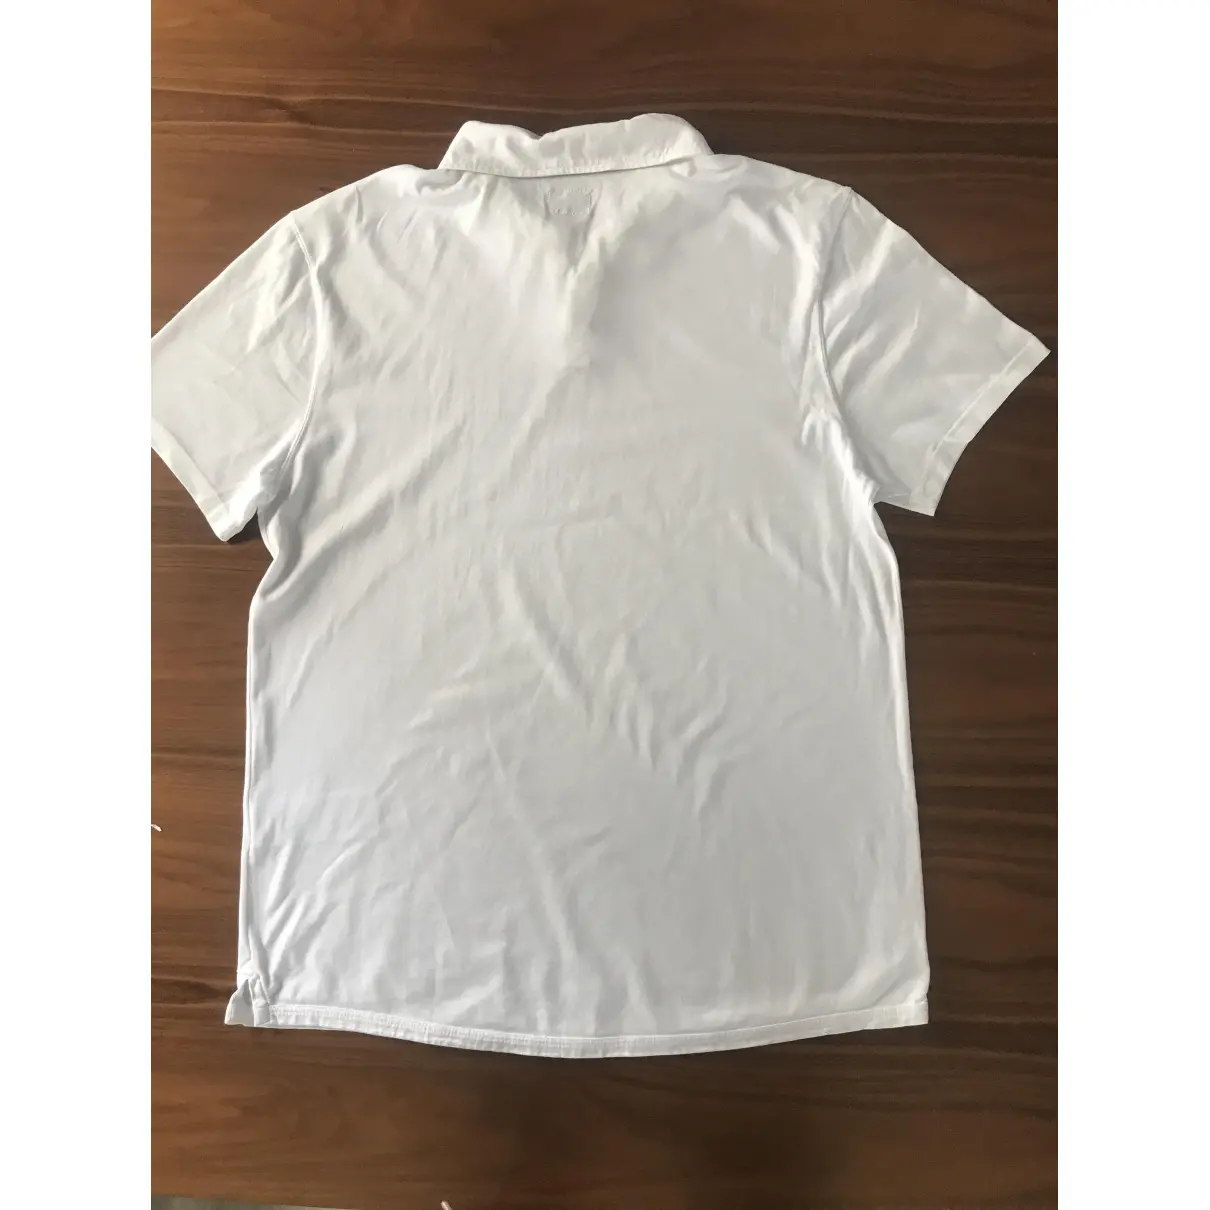 Buy Cp Company White Cotton T-shirt online